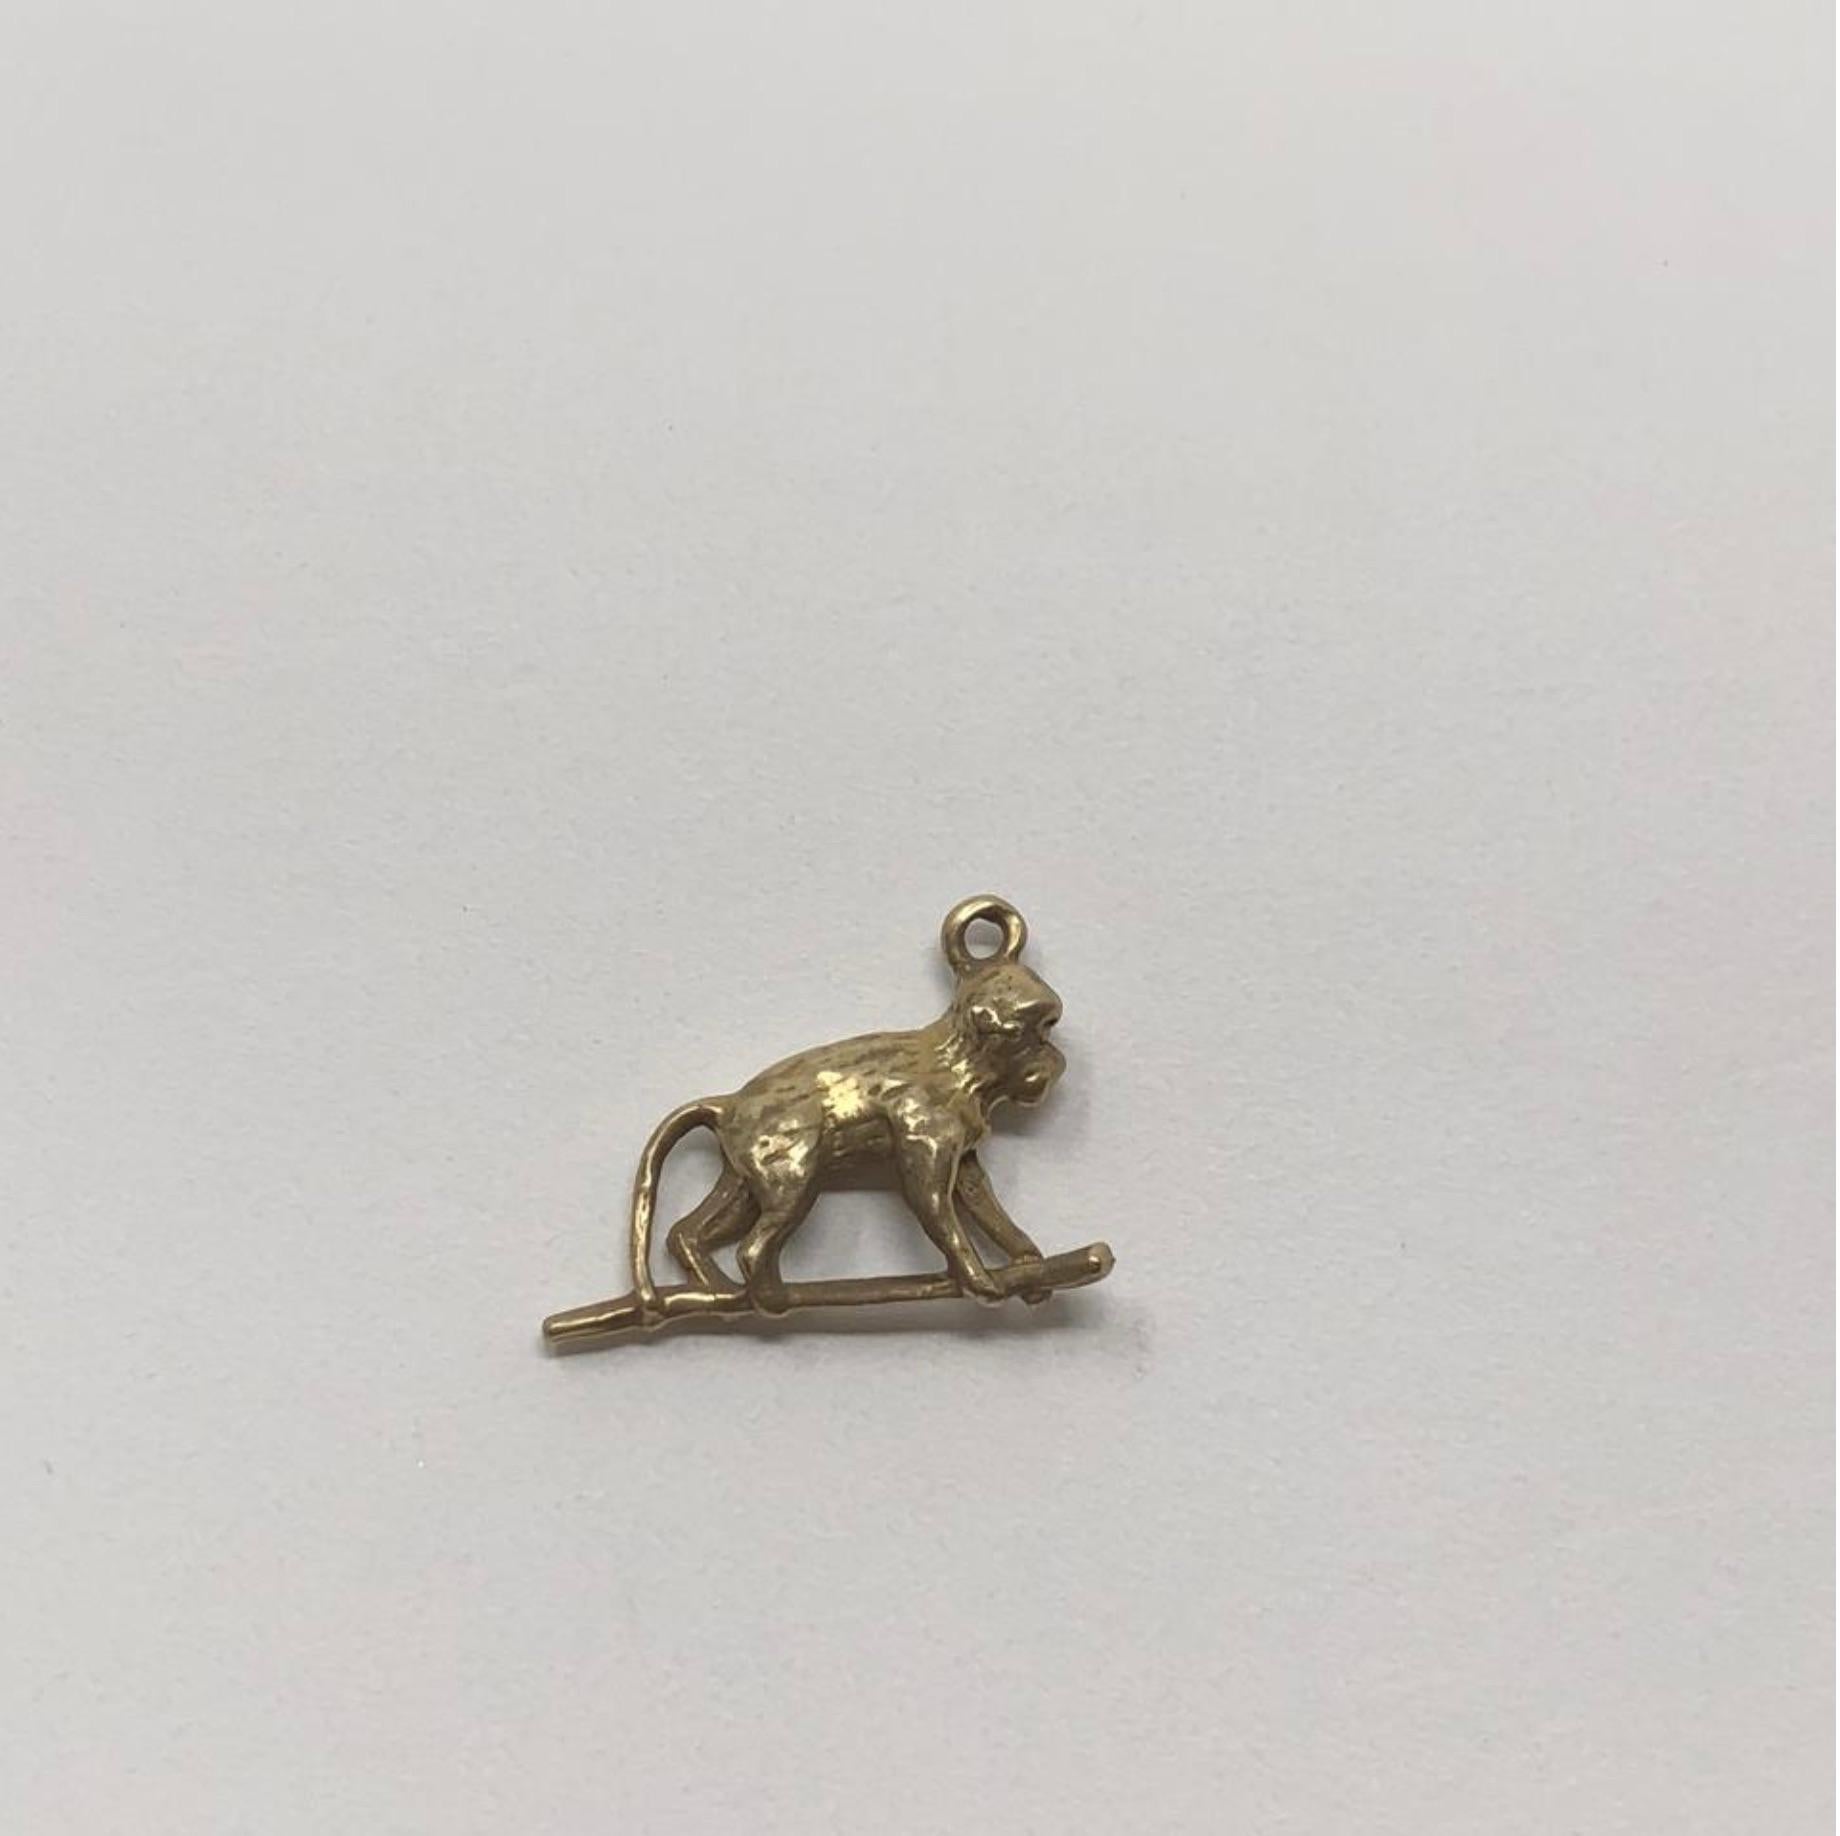 MODEL - Vintage 14k Gold Monkey on a Tree Branch Pendent Charm

CONDITION - Exceptional! No signs of wear.

SKU - 2382-FL

ORIGINAL RETAIL PRICE - 175 + tax

MATERIAL - 14k Gold

WEIGHT - 1.4 grams

DIMENSIONS - L.6 x H.5 x D.2

COMES WITH - No